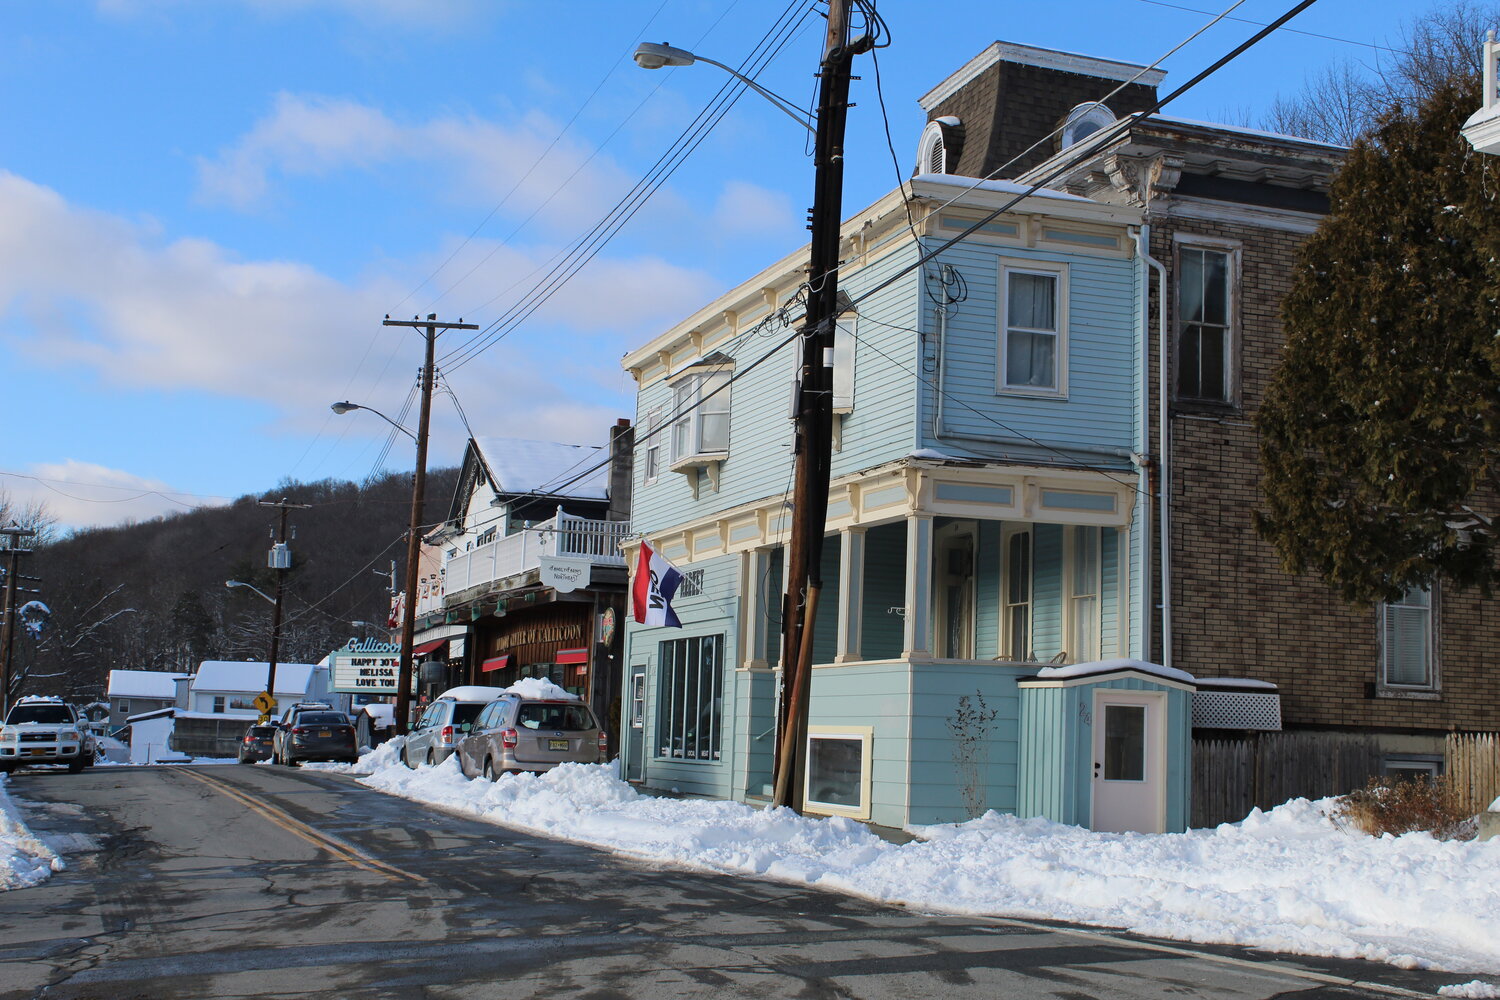 A view of Upper Main Street in Callicoon, NY,  in 2018.